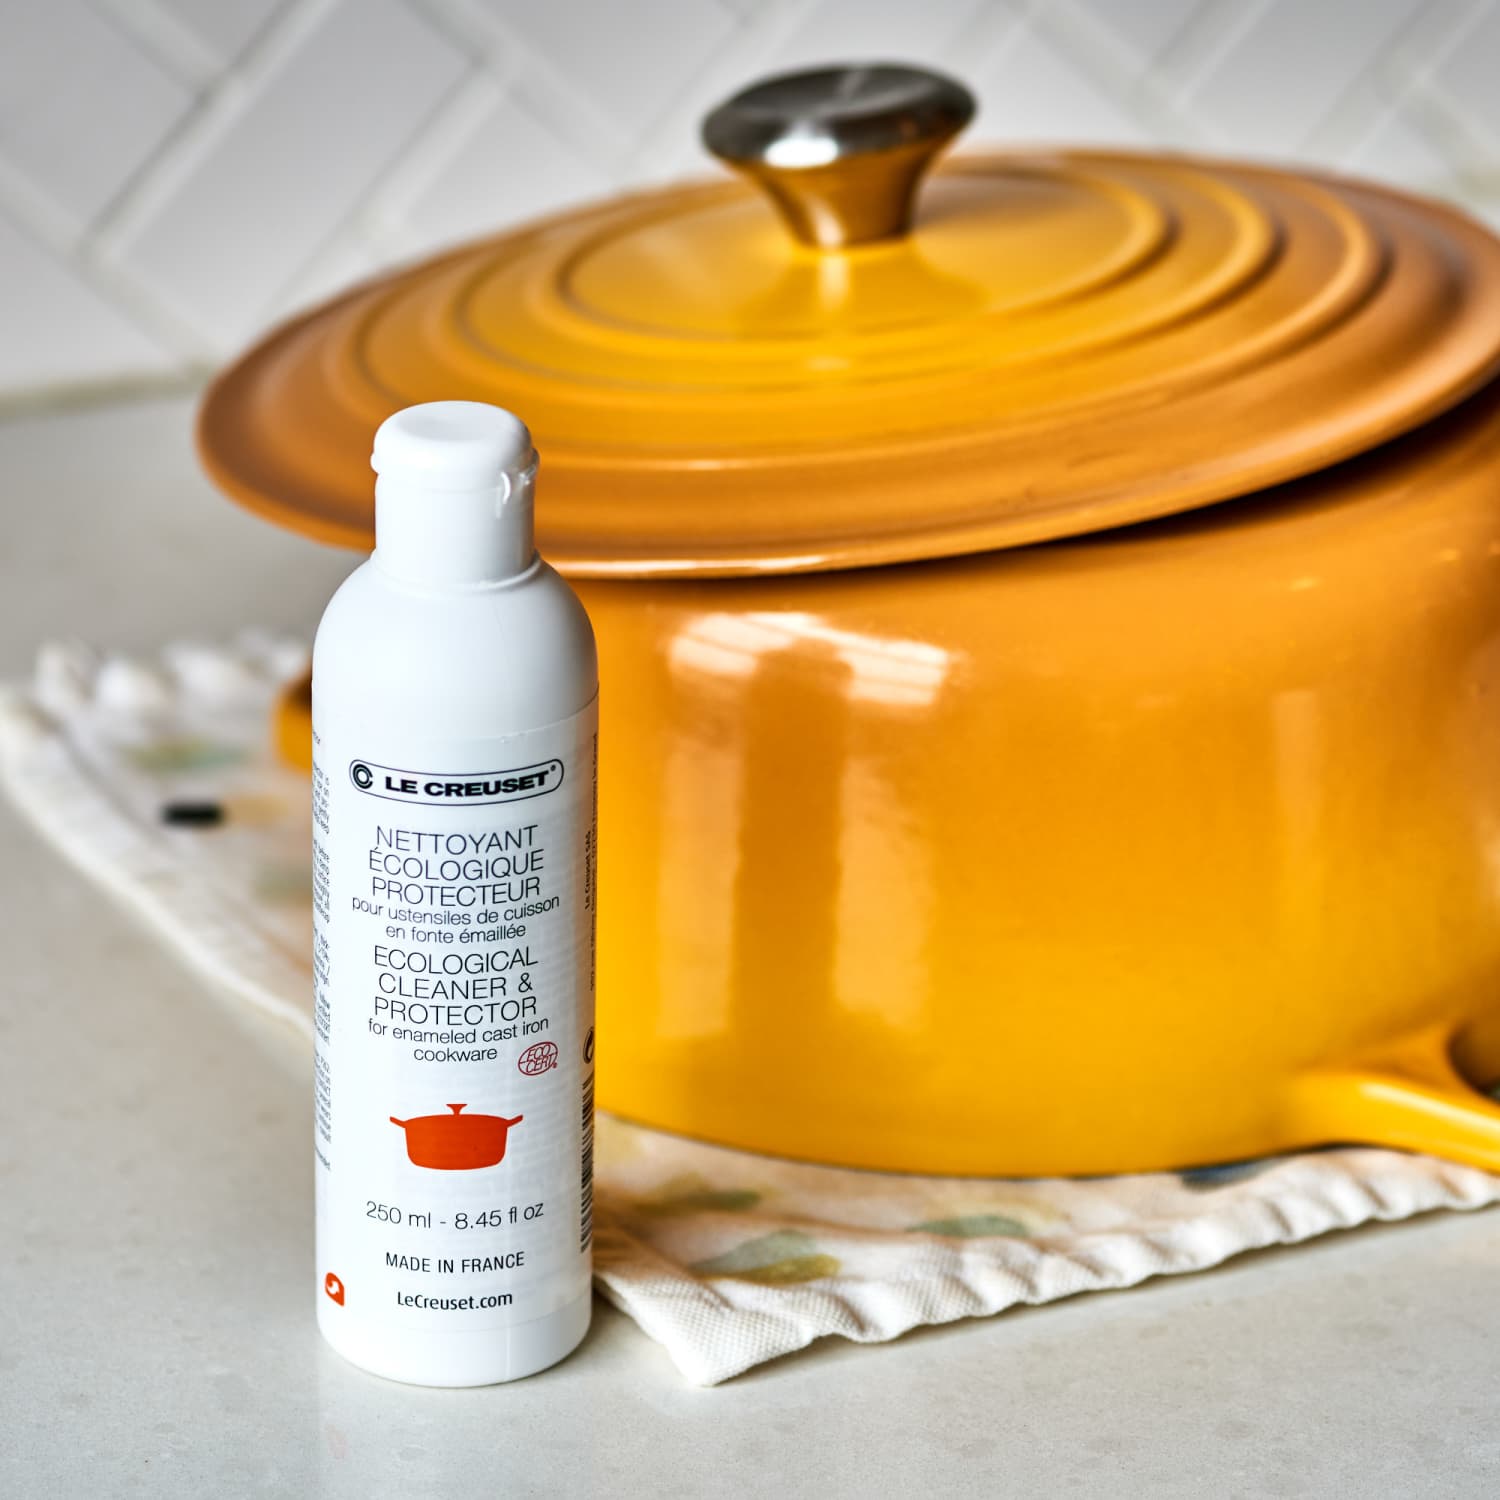 Le Creuset Cleaner Review